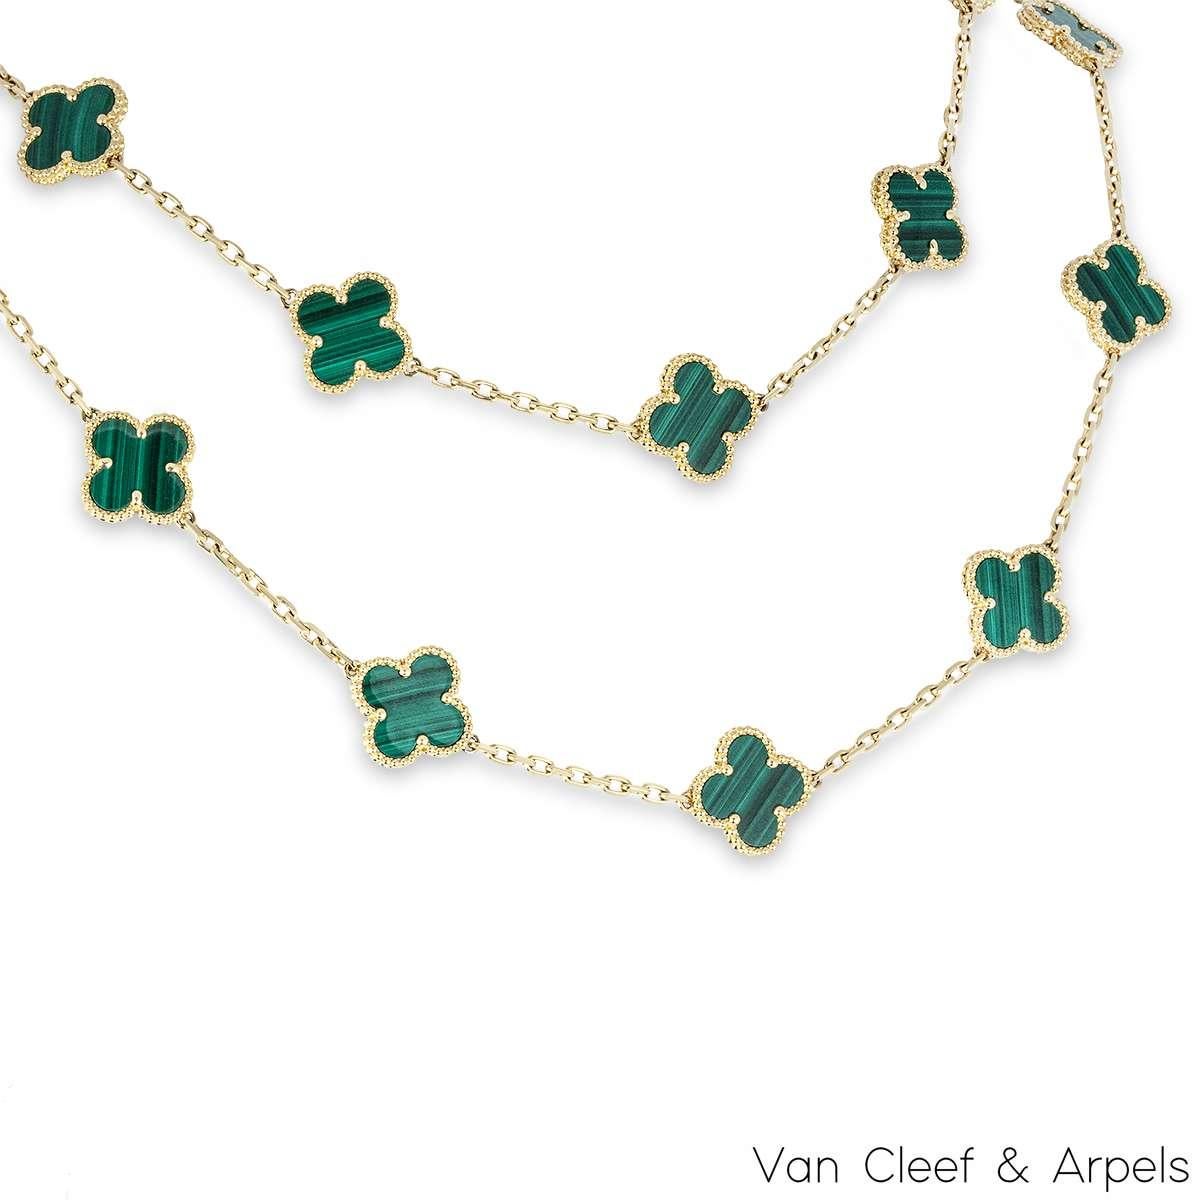 An iconic 18k yellow gold long necklace by Van Cleef & Arpels, from the Vintage Alhambra collection. Featuring 20 of the iconic 4-leaf clover motifs, each set with a beaded edge and a malachite inlay throughout the length of the necklace. The trace